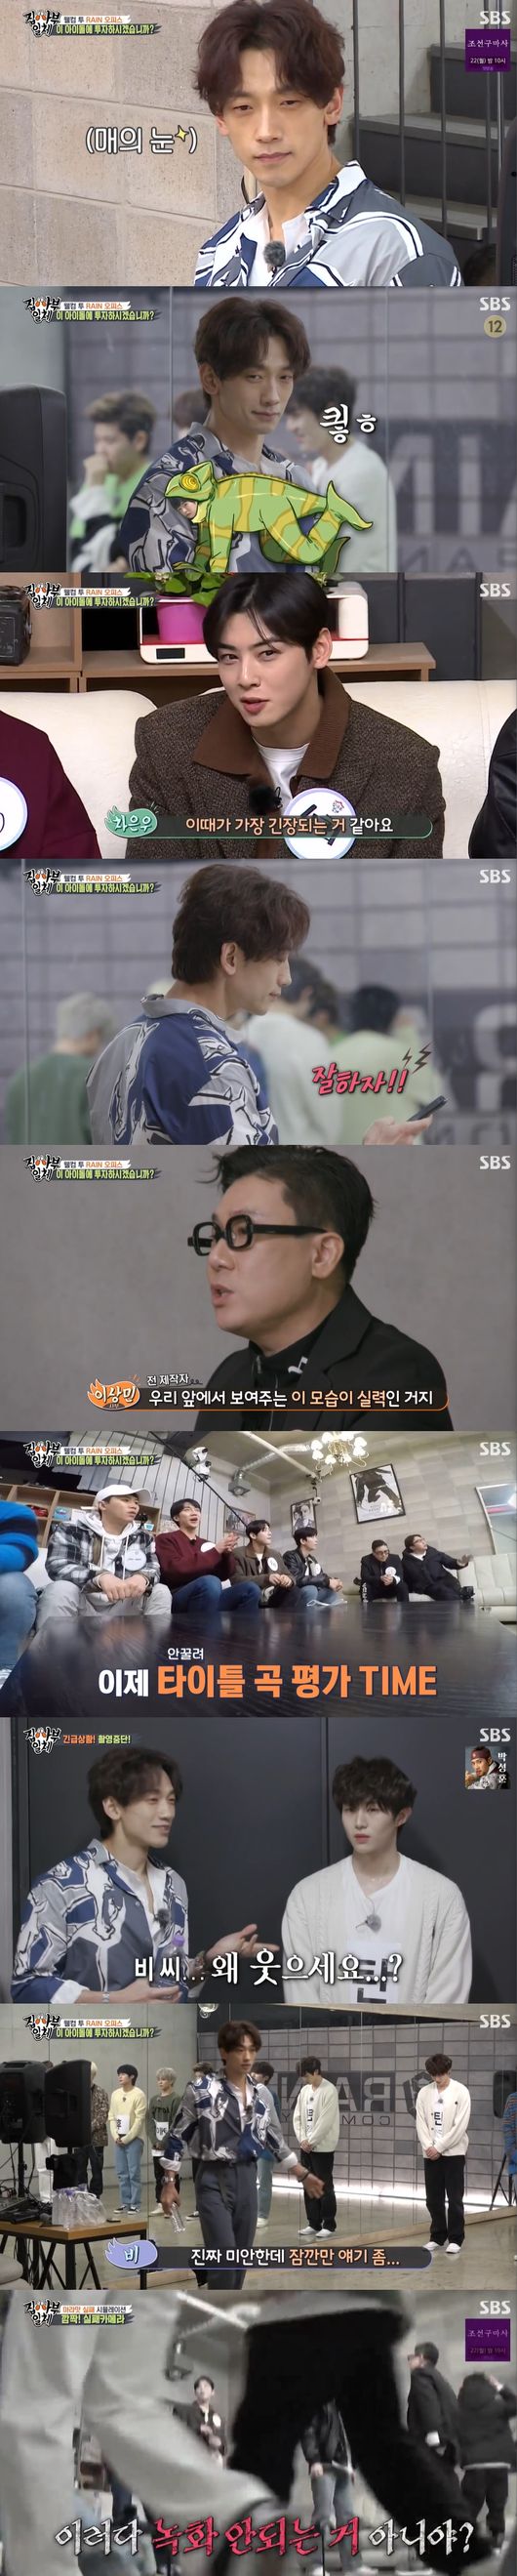 In All The Butlers, the rain raised the voices to Cypher members and made the members as well as the viewers surprised by the way they had never seen before.On the 14th, SBS entertainment All The Butlers, Rains new group Cypher appeared together.On this day, Rain revealed his hard training of his new group Cypher, and asked him to evaluate the groups military affairs. He said, Do not be wrong about choreography.But the member Tan was wrong about choreography. Why are you choreographed? And when he made a mistake, Do not get your mind wrong? Do not get wrong, how do you want to broadcast?Why are you doing it, Im doing it a few times, he said.The members who looked at this were nervous and looked at the Cypher members with sadness.The rain, which was getting more and more loud, is suddenly stopped, saying, I am really sorry, but I will talk for a while.Ill take a minute, come out, Rain said. What are you doing, did you start to do this? There is no opportunity on stage, I will finish the last one and do my best.Turns out that Tak Jae-hun, Lee Sang-min and Rain had secretly camerad the members together, creating a surprise event to create a failing situation.With the failed camera continuing, Rain told member Tan: Why dont you write the impression, man, dont you want to?The timing is late, why do you want to make it fail because of you? Tan said, I will cool my head a little. Rain suddenly left, and the recording was stopped in response to the request for editing, saying, Please blow everything.In the meantime, Tan said he would visit his mother and said, I do not think I can.Turns out that Tak Jae-hun appeared disguised as Tans mother, and everyone was secretly taken aback by the camera, a situation that Cypher members didnt know.It was a surprising perfect hidden camera to the viewers in the angry appearance of the rain that I had never seen before.All The Butlers broadcast screen capture